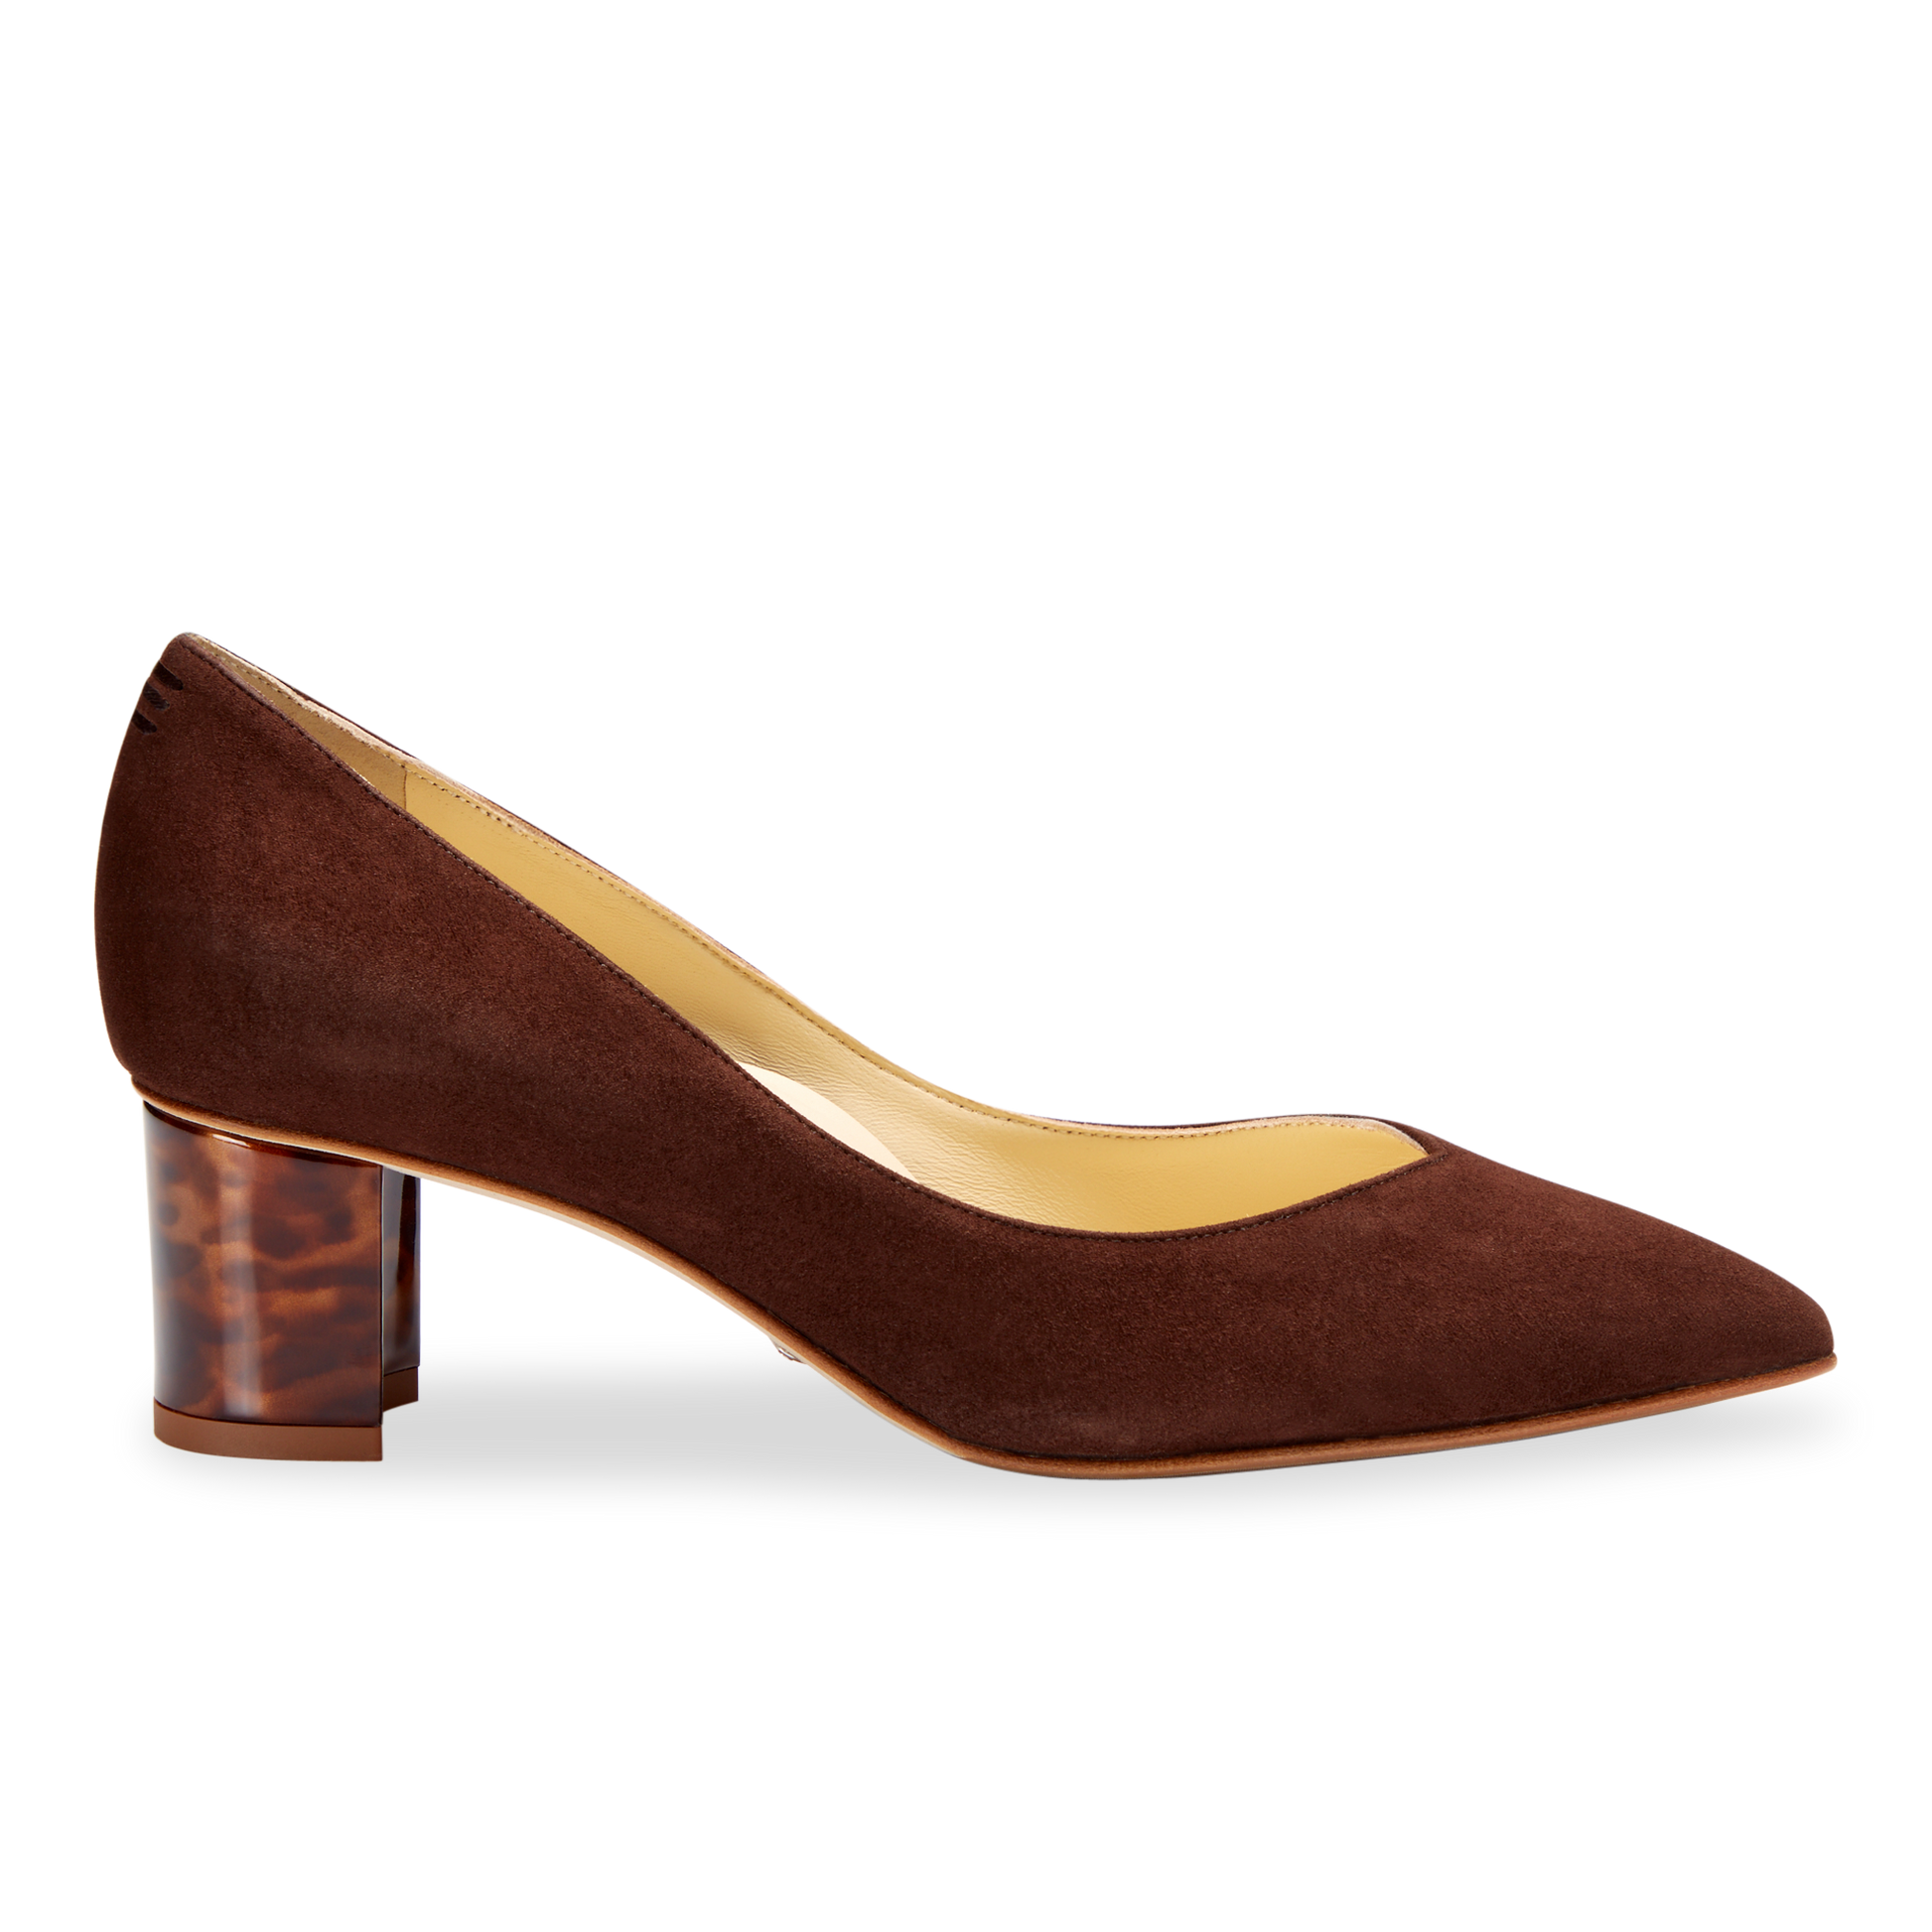 50mm Italian Made Pointed Toe Perfect Emma Pump in Espresso Suede